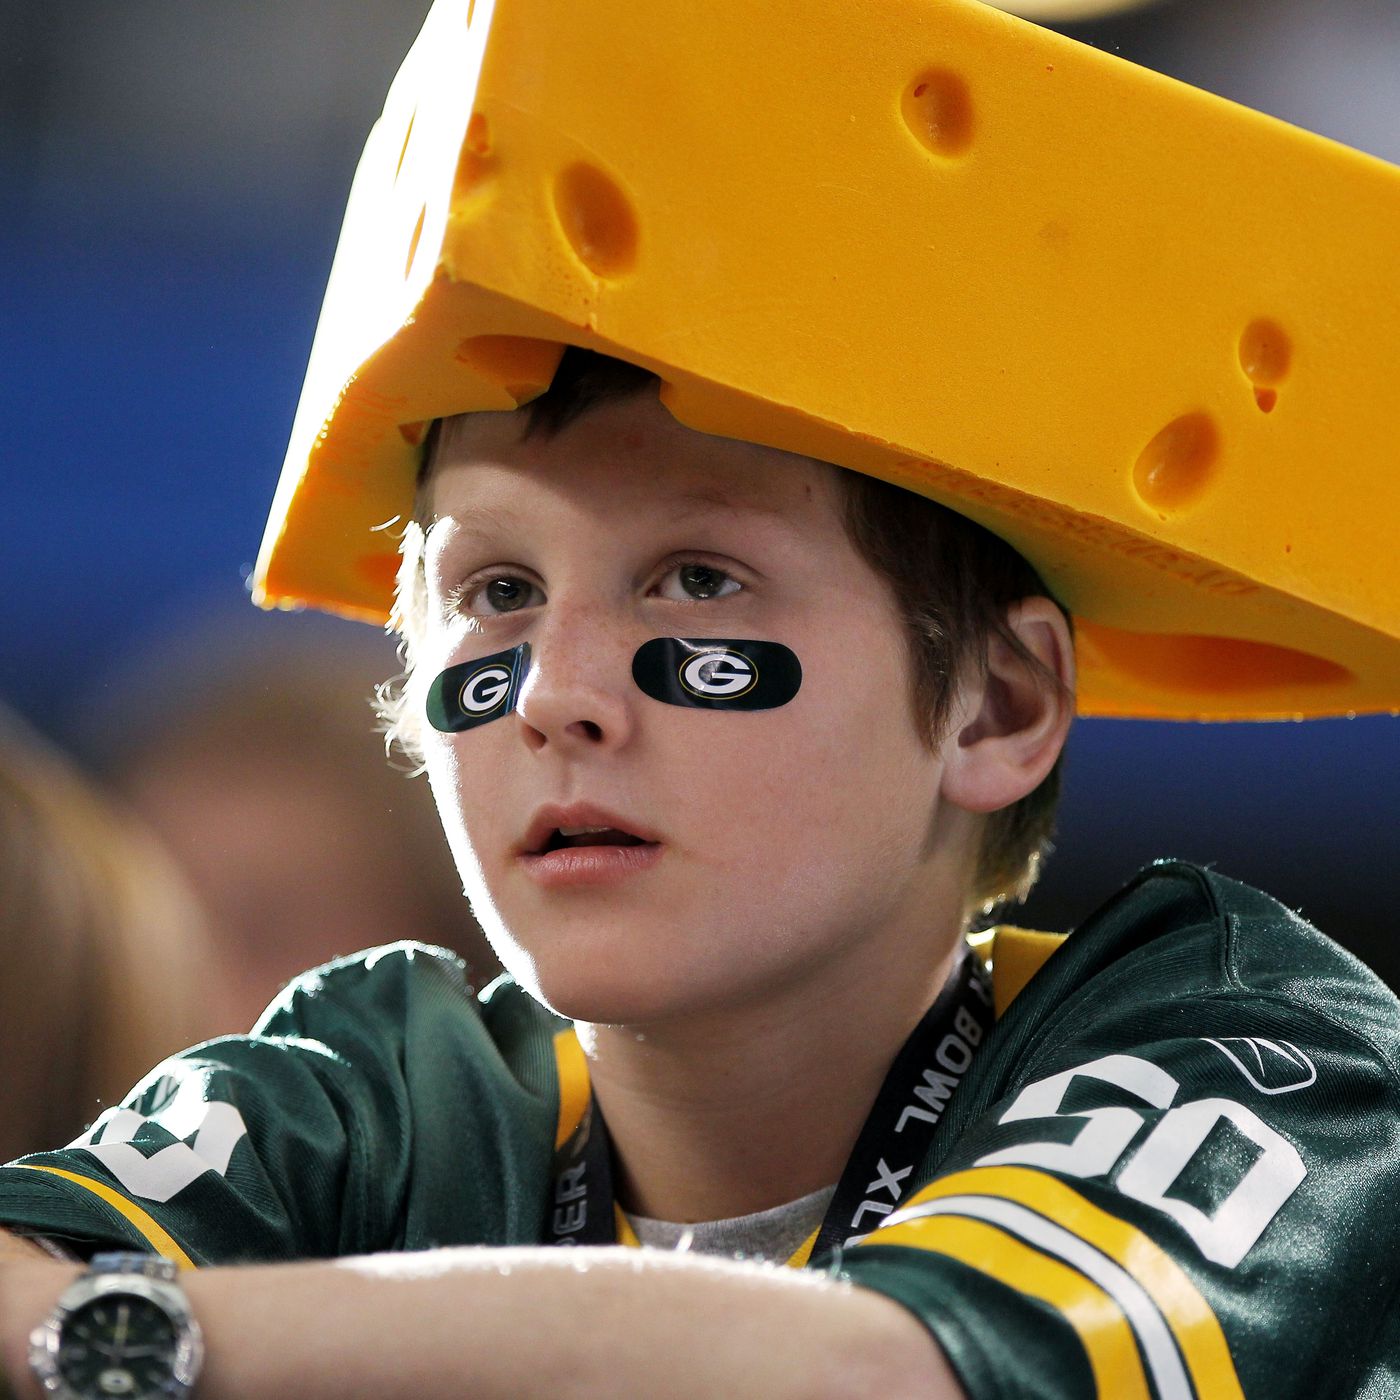 The Packers acquire Foamation, the originator of the Cheesehead